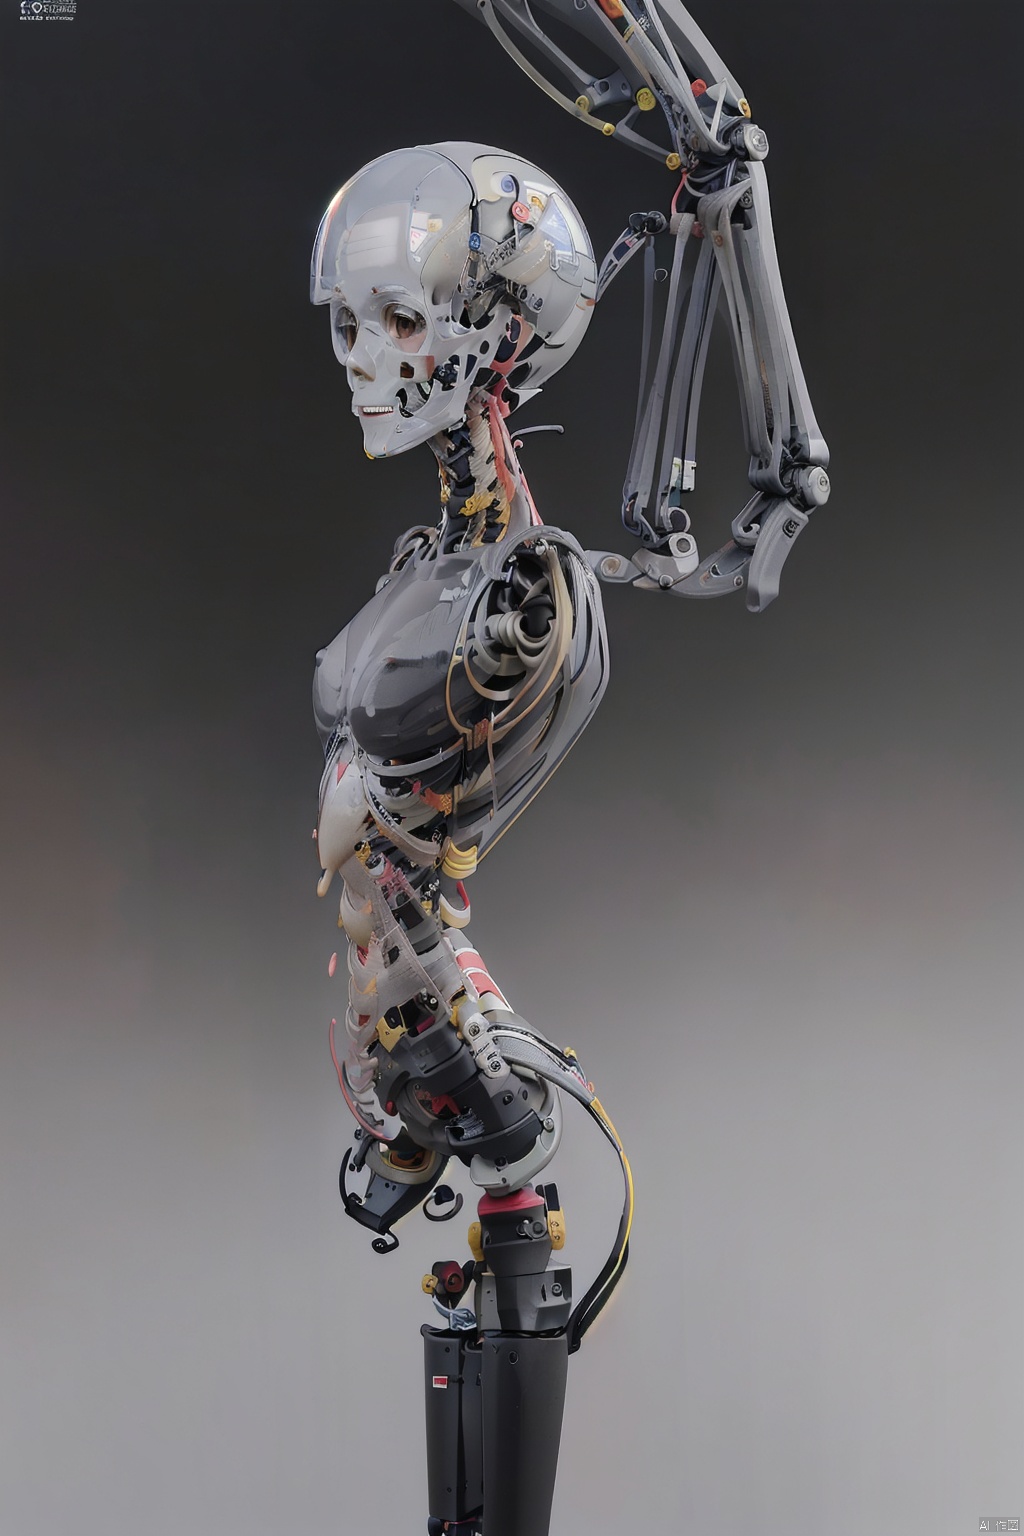  A robot prosthesis, bionic human bones, spine, ribs, ulna, , 
scapula, clavicle, mandible, no muscle skin, just skeleton, simple semi-finished robotics industrial product design., Light master, A white product, A bionic robot with bionic muscles, Animal ear